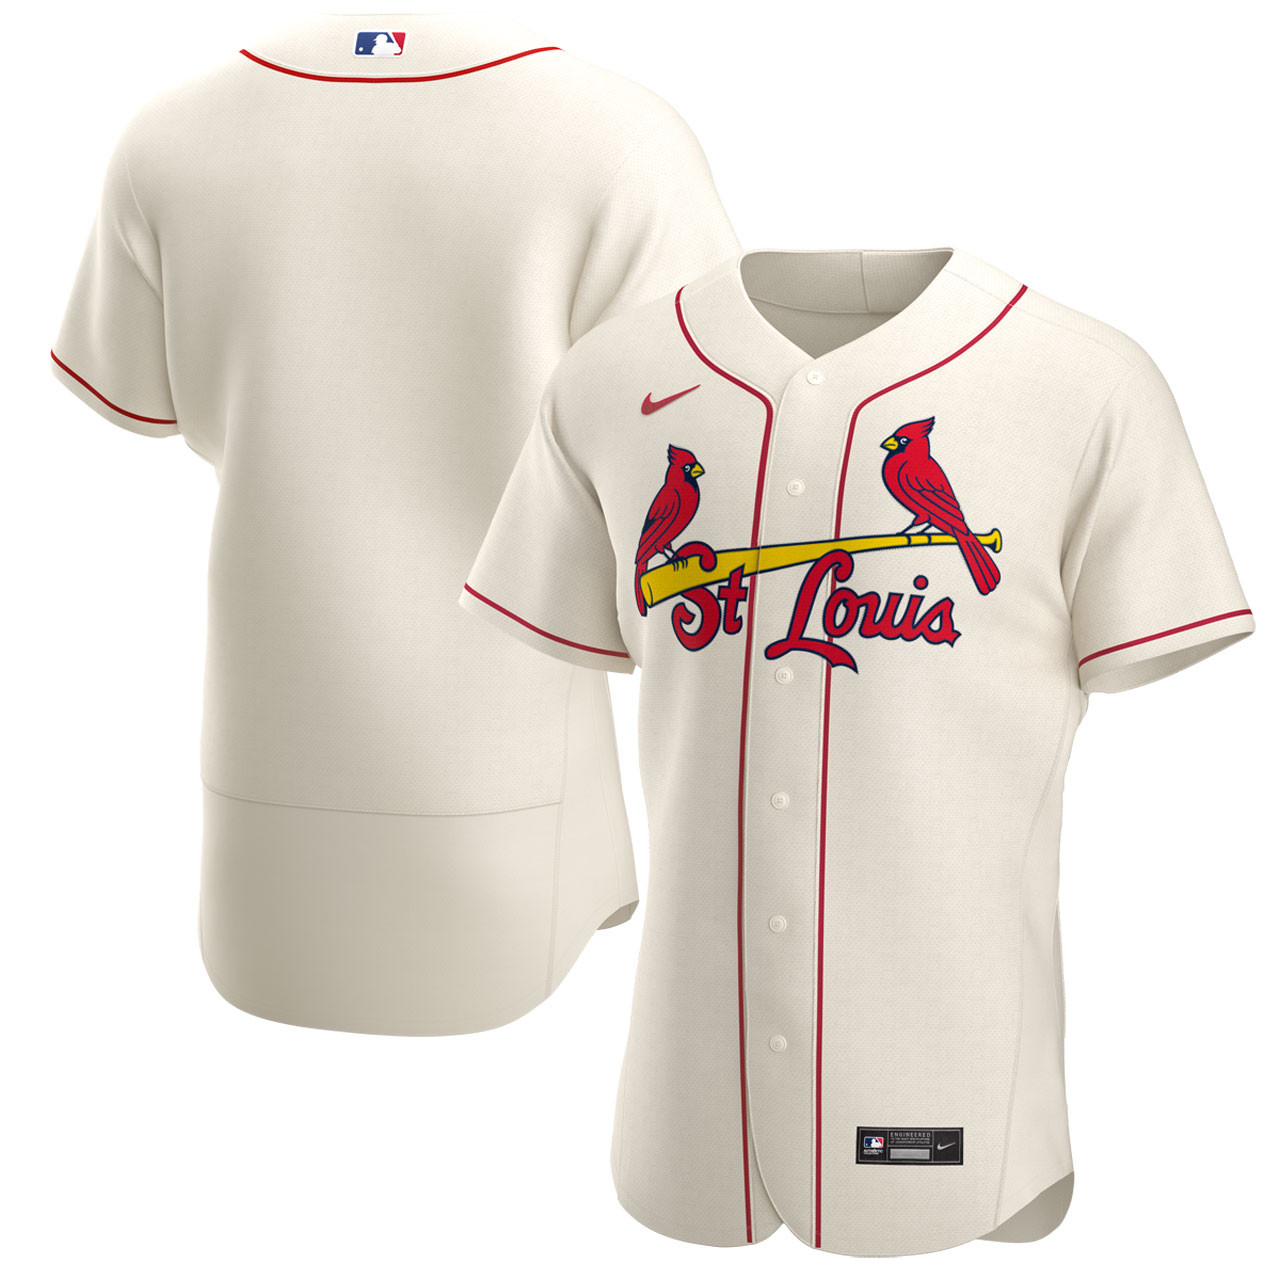 St. Louis Cardinals Cream Alternate Authentic Jersey by Nike